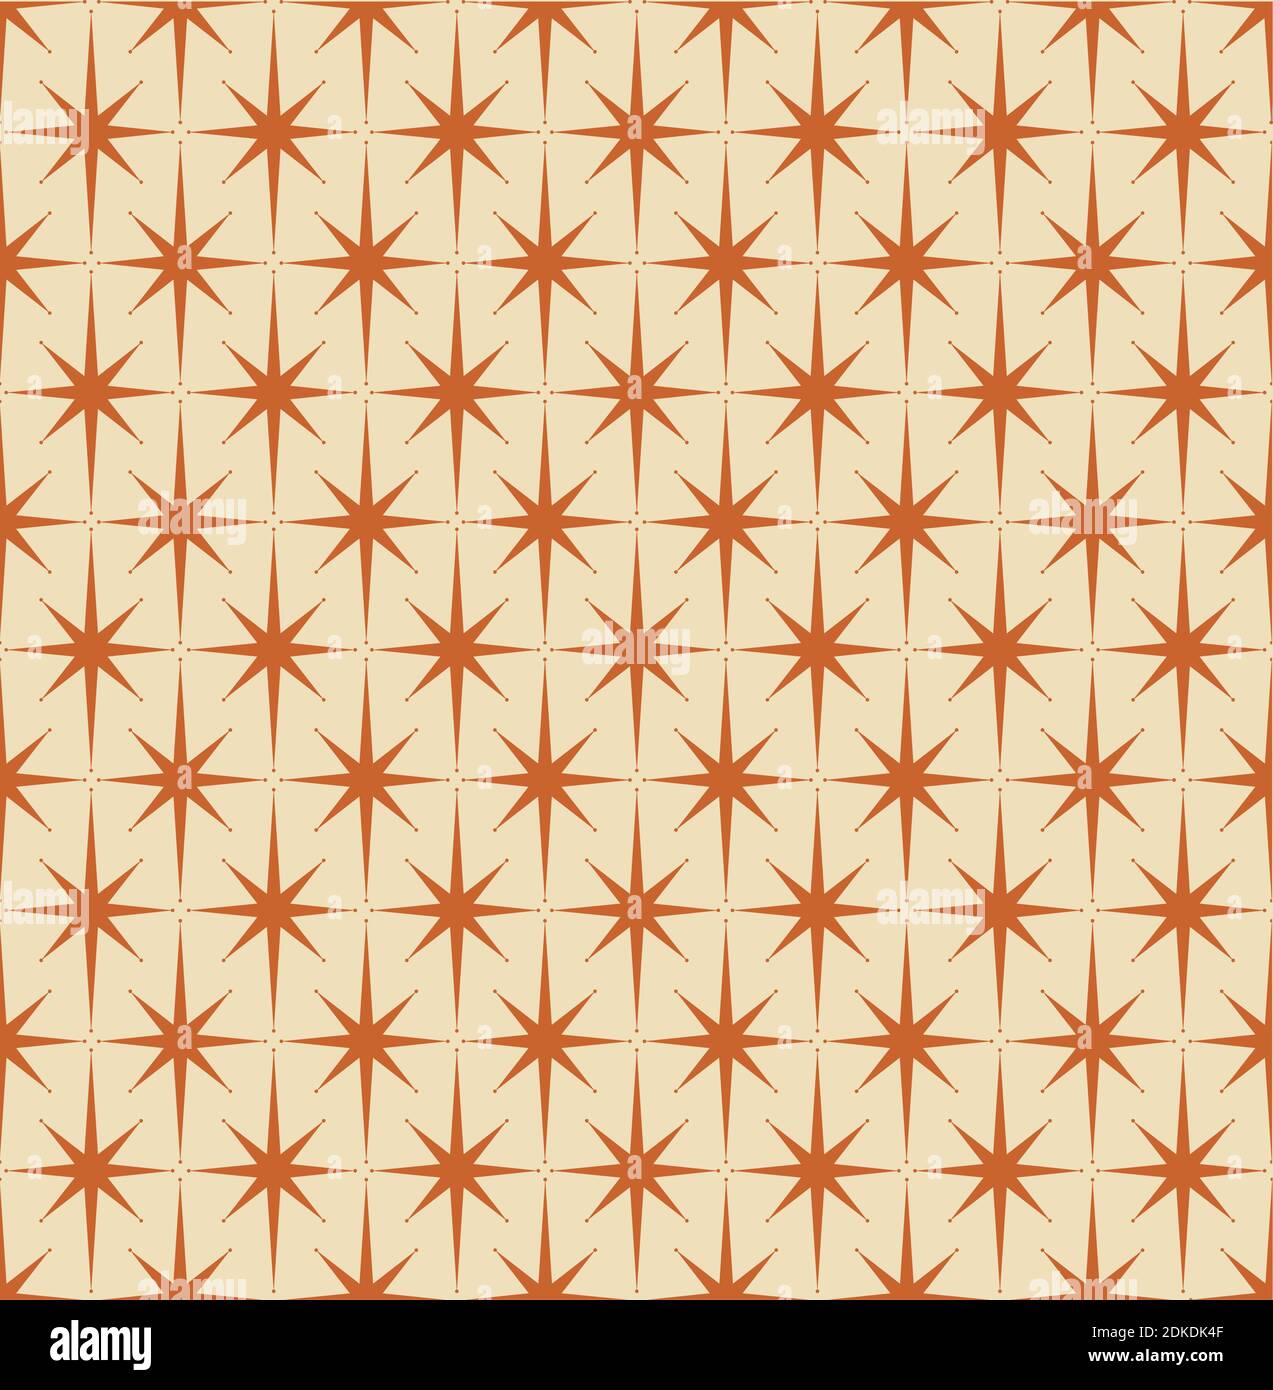 Mid-century modern wrapping paper starburst pattern, with orange on cream.  Inspired by Atomic era. Repeatable and seamless. Stock Vector